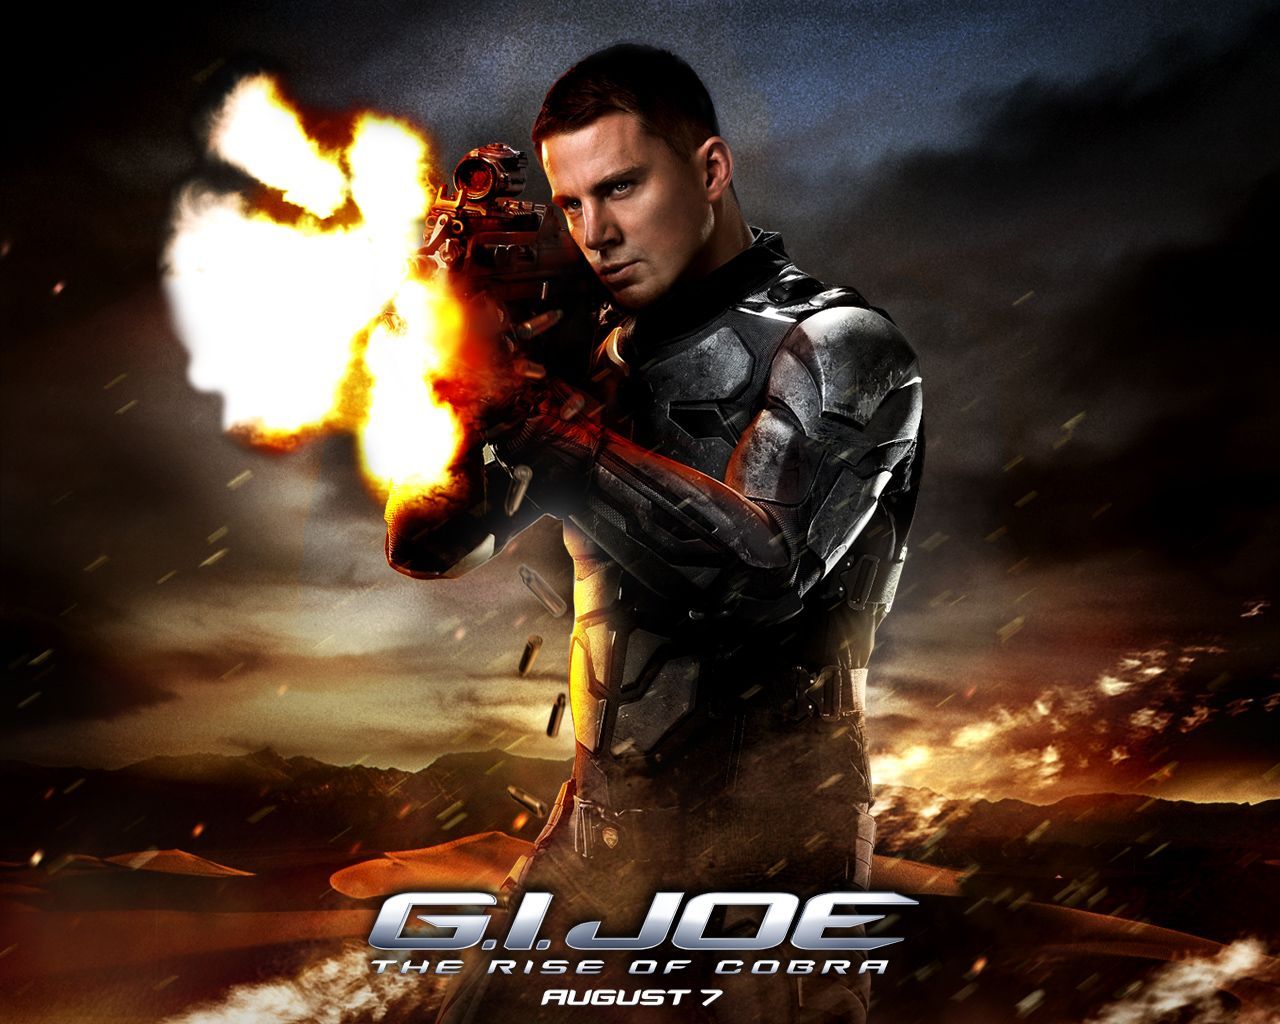 Movies: G.I. Joe: The Rise of Cobra, picture nr. 35777